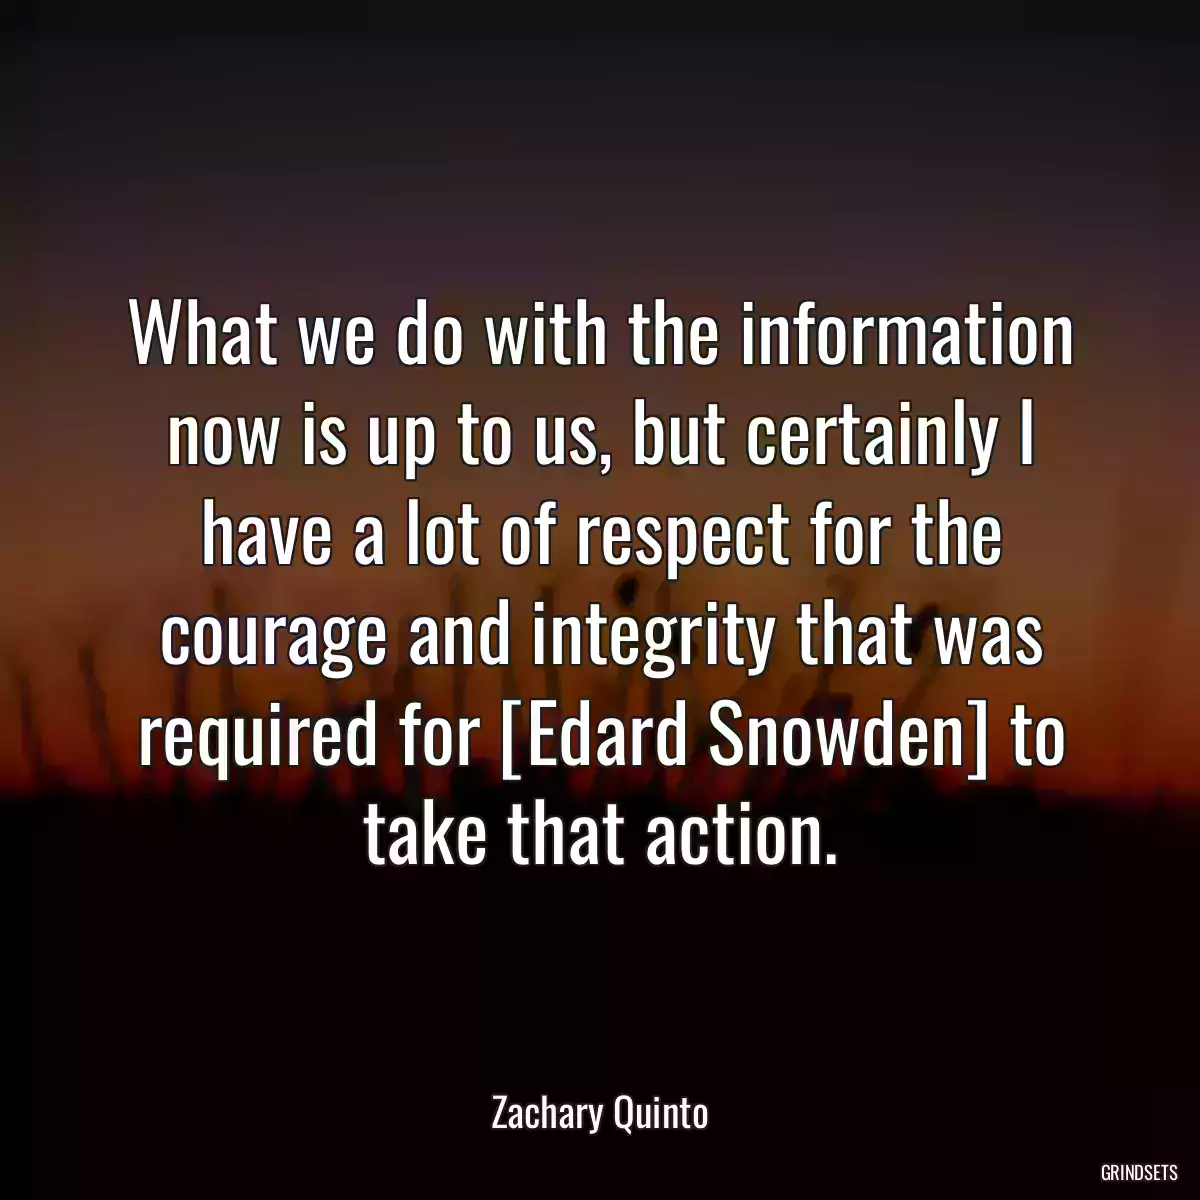 What we do with the information now is up to us, but certainly I have a lot of respect for the courage and integrity that was required for [Edard Snowden] to take that action.